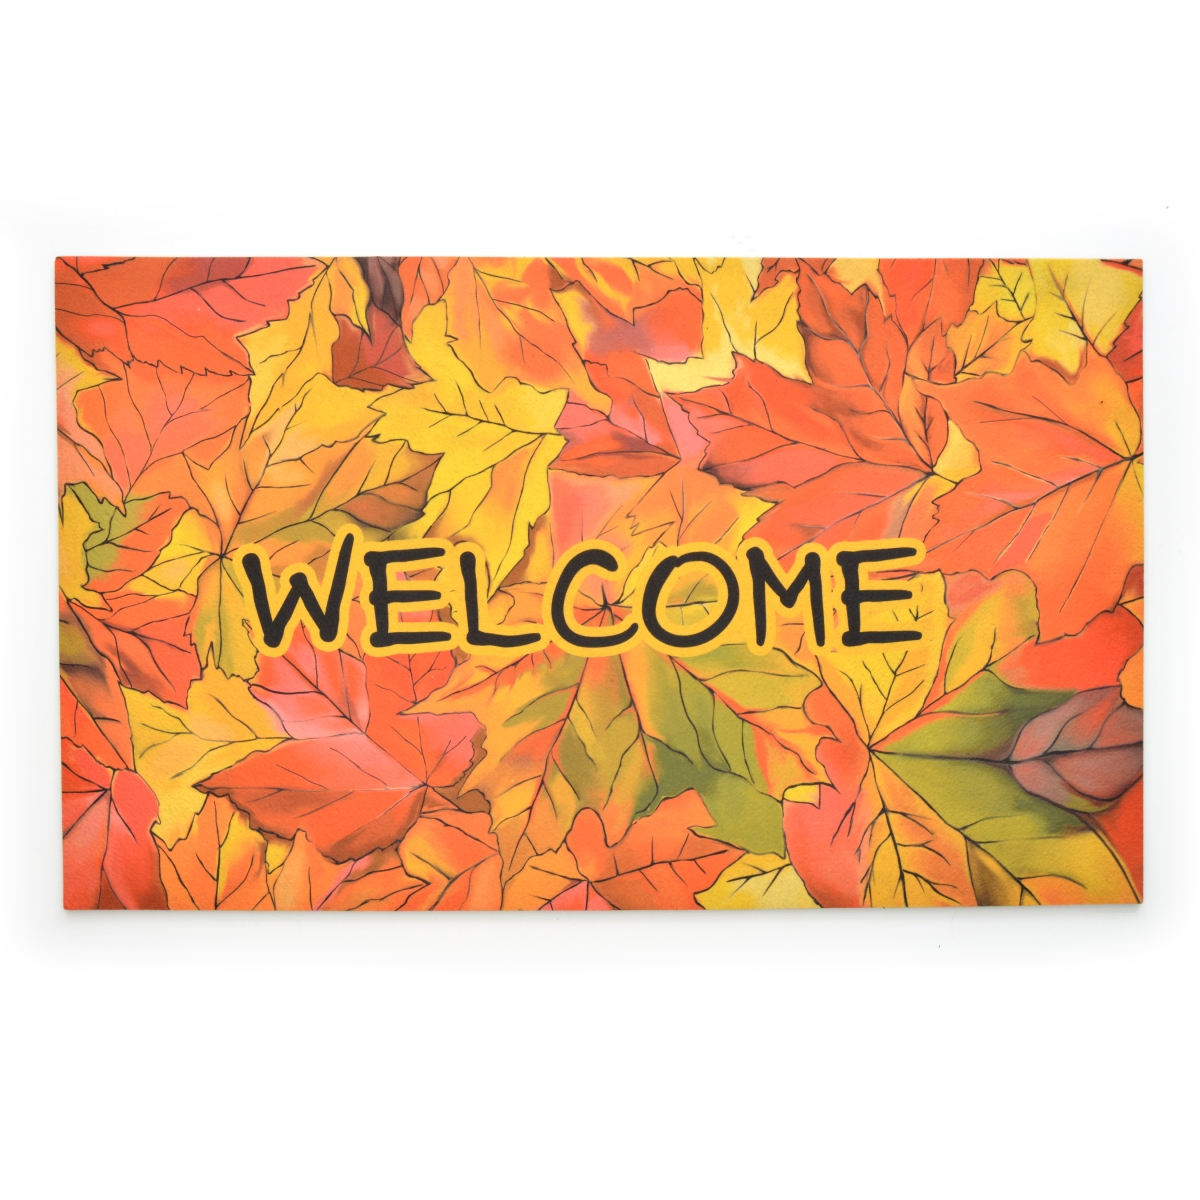 Strb-15802-12 18 X 30 In. Crumb Rubber Door Mat, Welcome To Fall